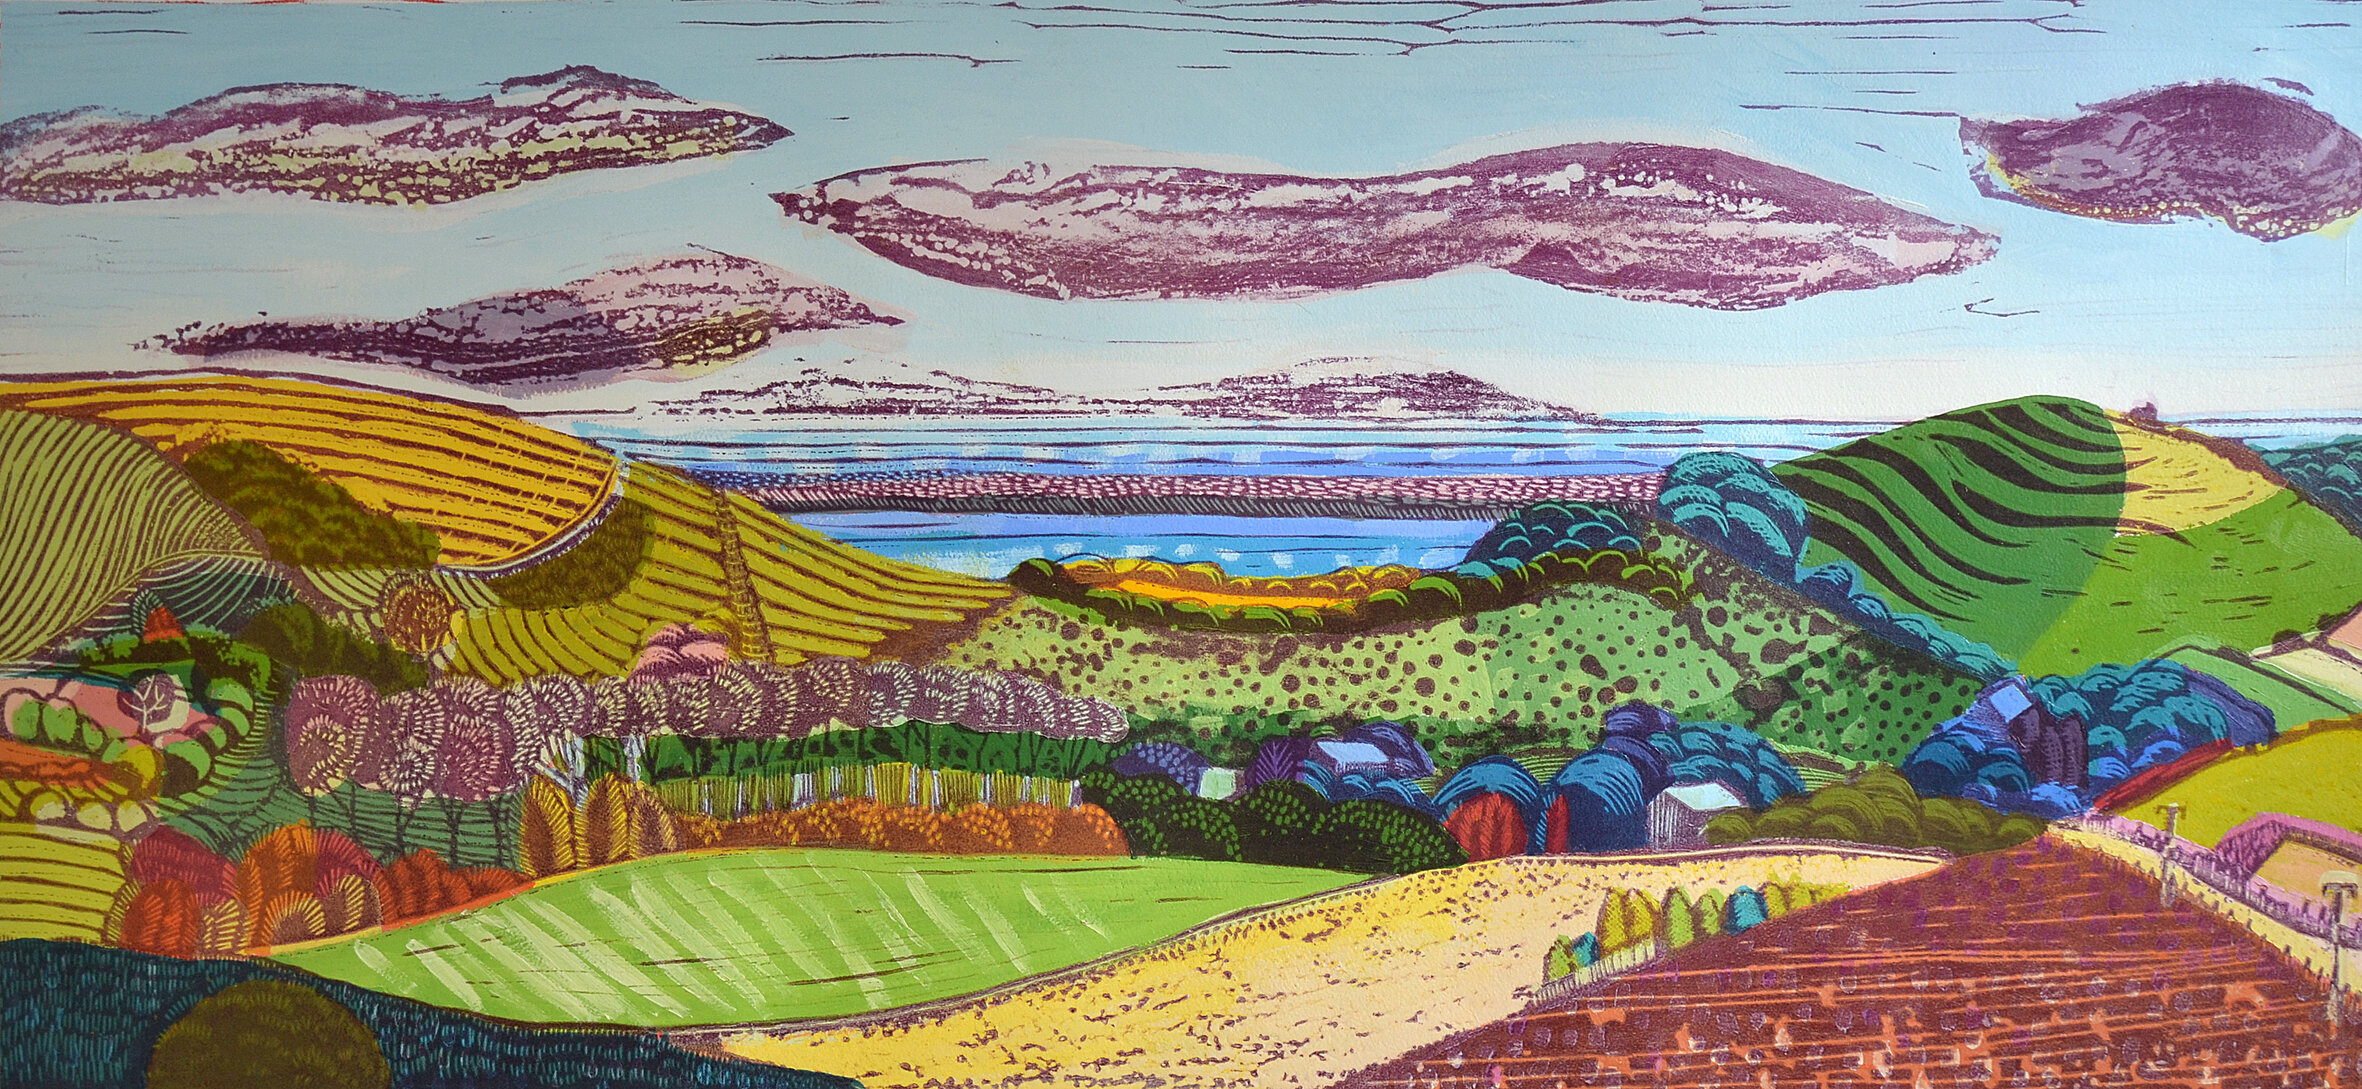   The Land of Sea + Air   version 12   linocut/oil 800mm x 380mm SOLD Further versions available 